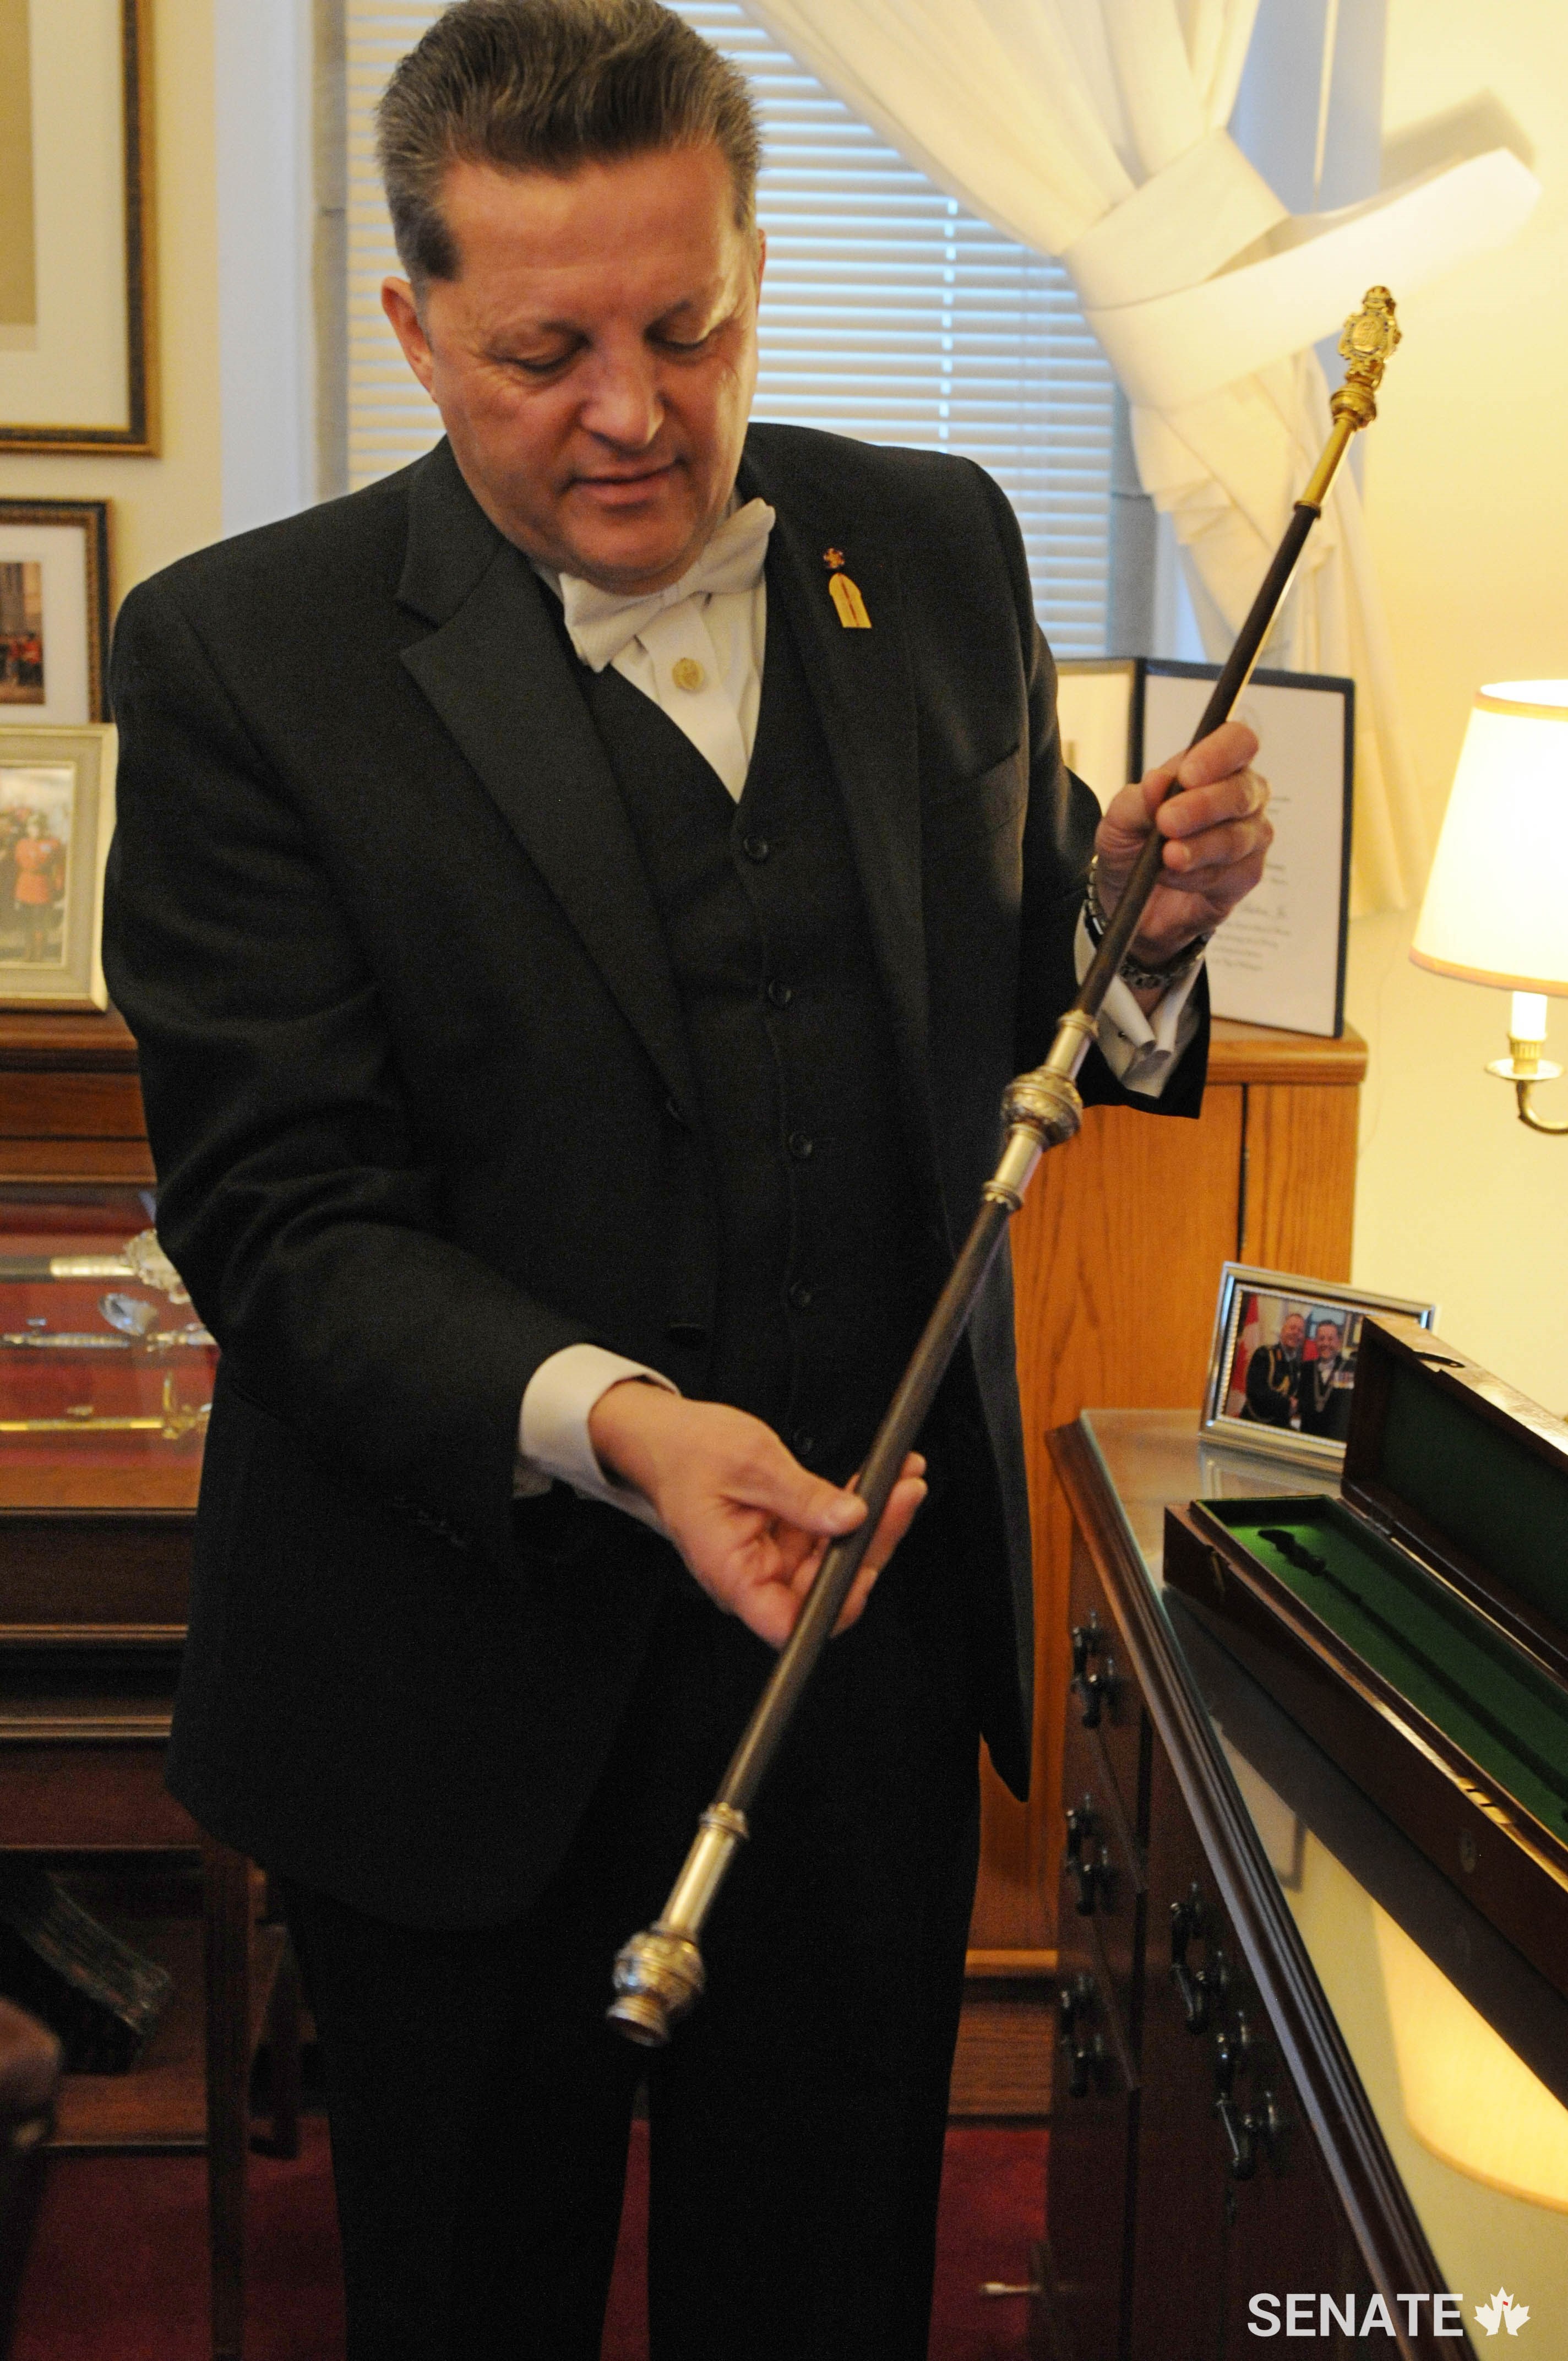 The Usher of the Black Rod, J. Greg Peters, displays the Black Rod currently in use. It was restored in 2016 as a gift, from Her Majesty Queen Elizabeth II, to the Senate of Canada for the sesquicentennial of Confederation. The green velvet-lined case dates to the presentation of the Black Rod to the Prime Minister of Canada, Sir Robert Borden, on June 21, 1918.